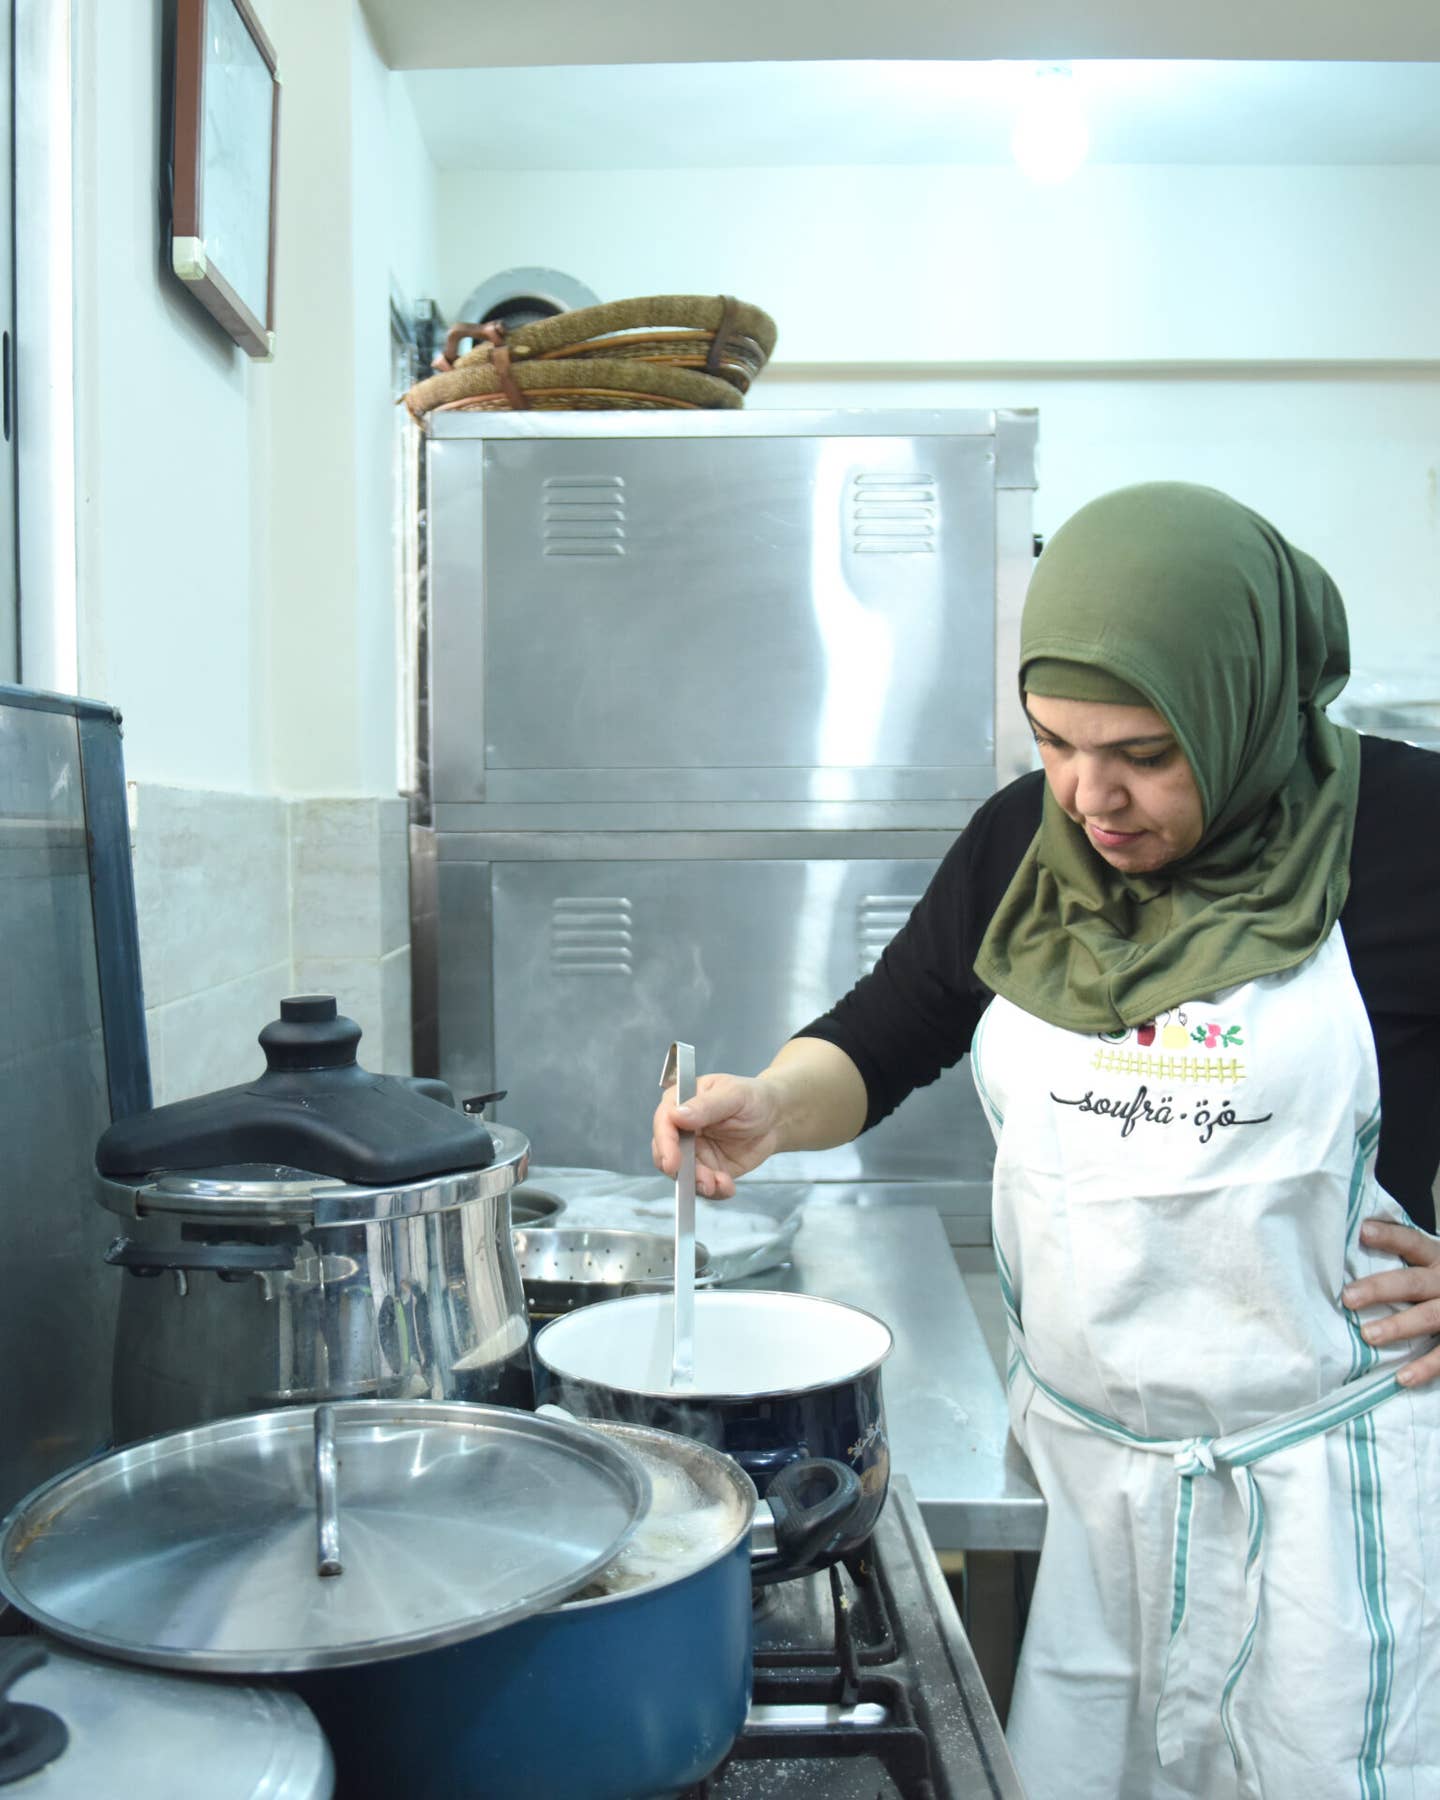 This Documentary Tells the Awe-Inspiring Story of a Refugee Turned Food-Truck Entrepreneur